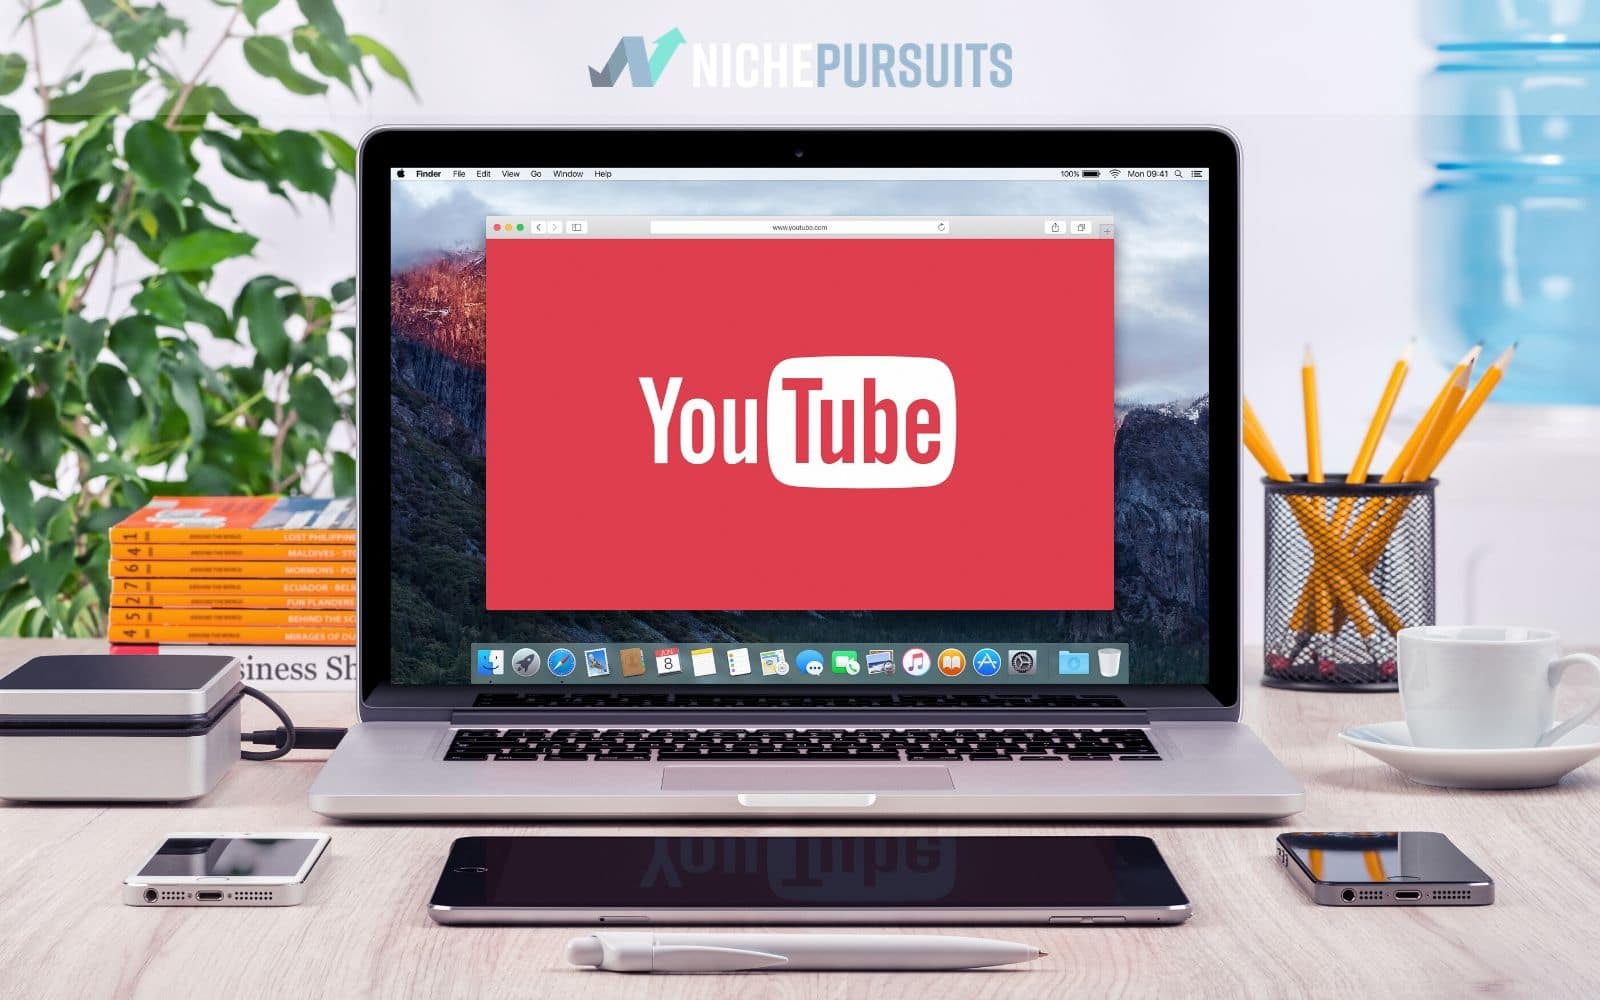 Affiliate marketing for YouTube - Adtraction